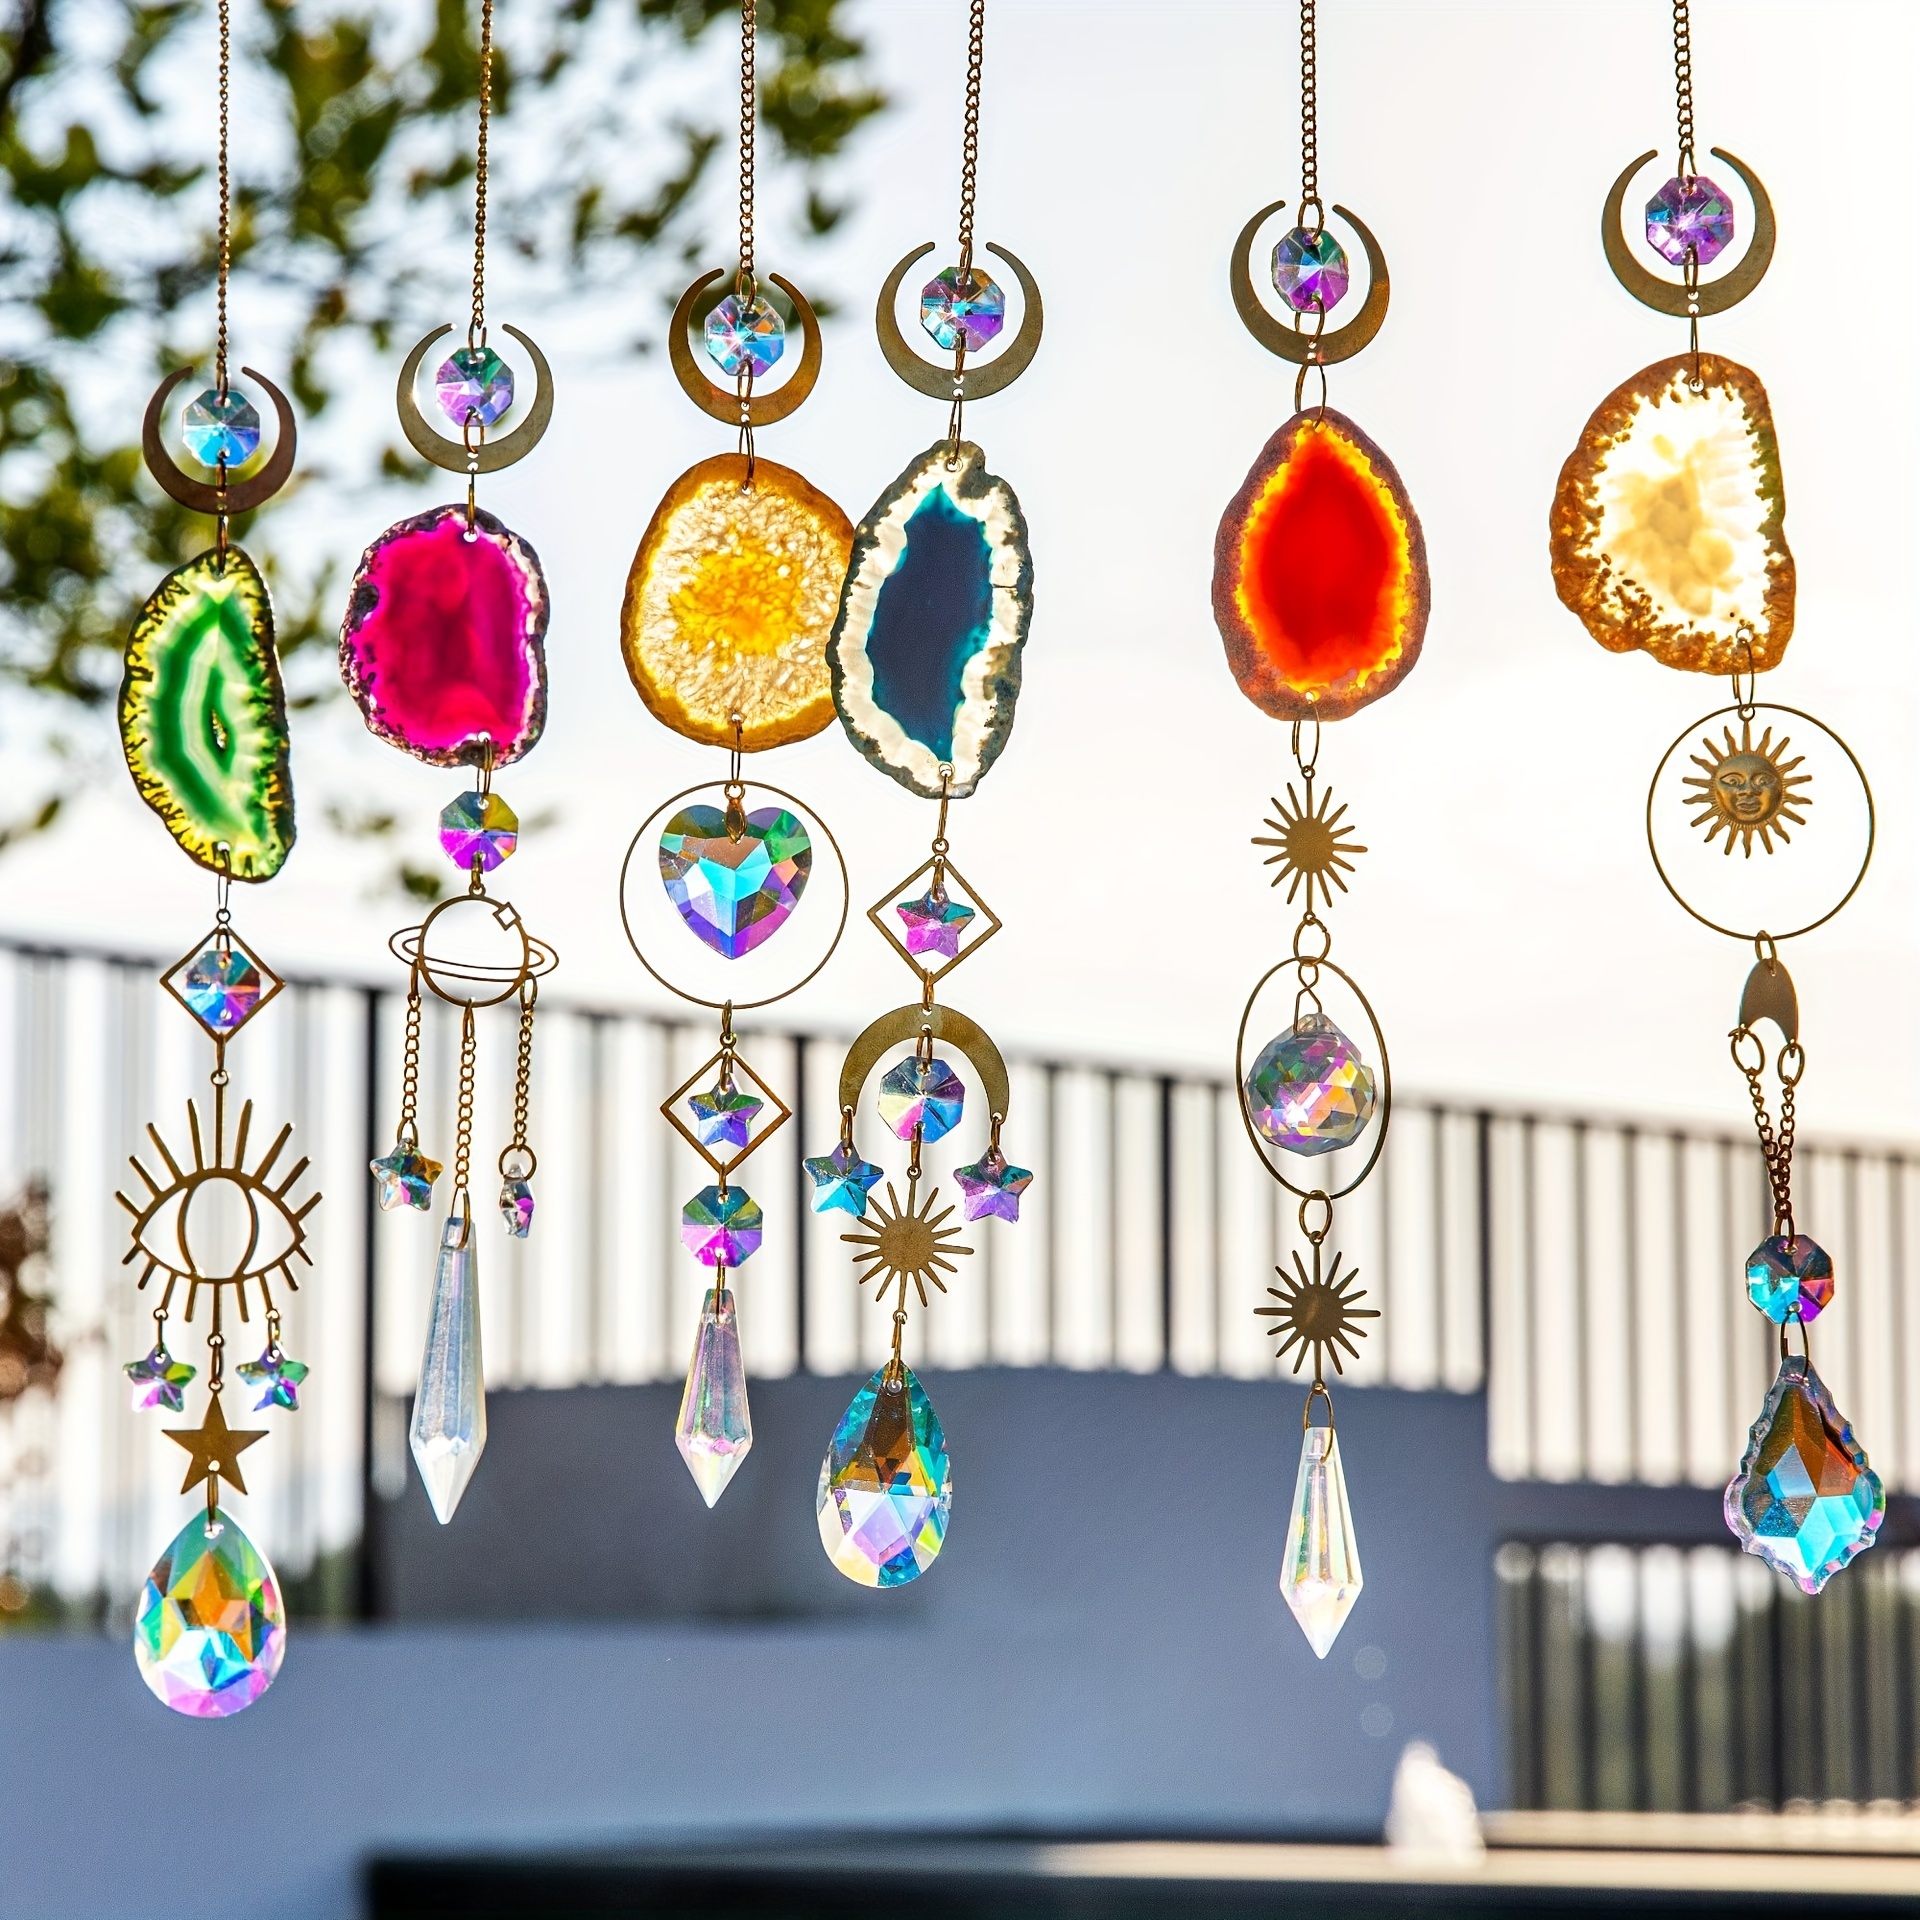 

6pcs, Crystal Suncatcher Sun Catchers Indoor Window Hanging Sun Catchers With Crystals Light Catcher With Prisms And Agate Slices For Indoor Outdoor Home Garden Wedding Decor